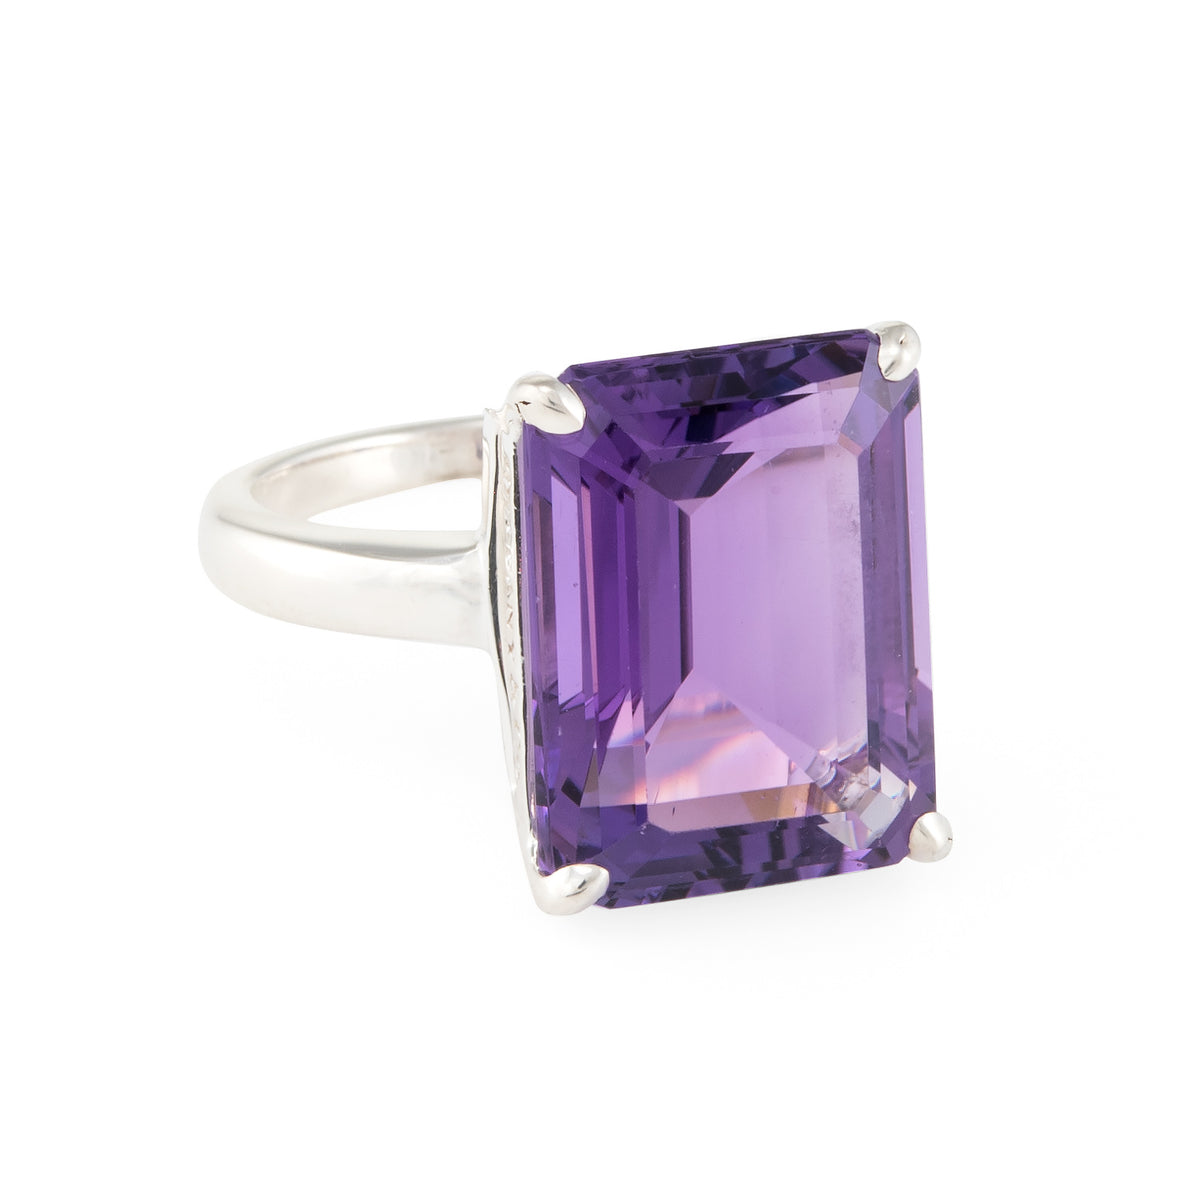 Tiffany & Co Sparklers Amethyst Cocktail Ring